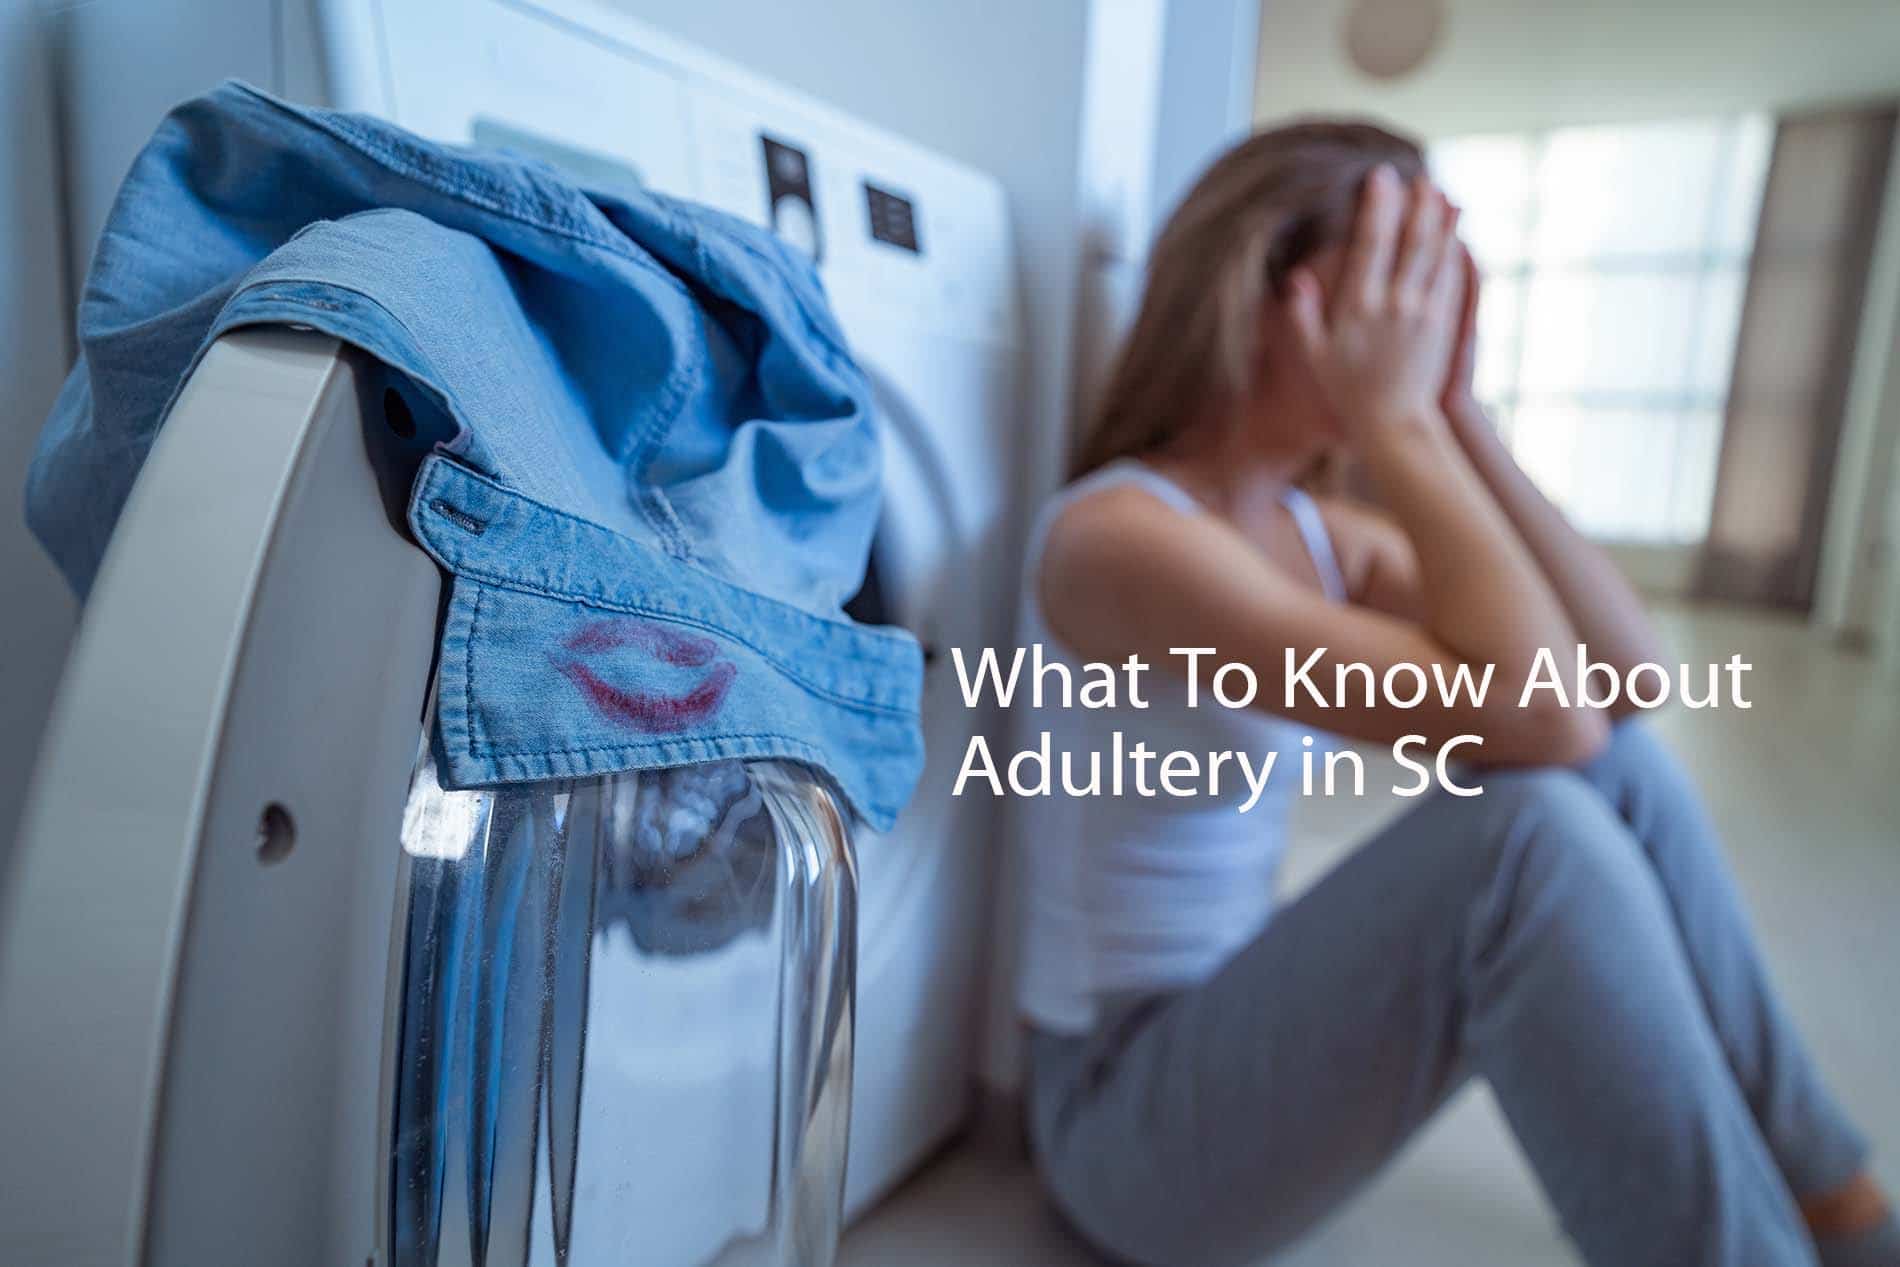 ADULTERY IN SOUTH CAROLINA – WHAT TO KNOW